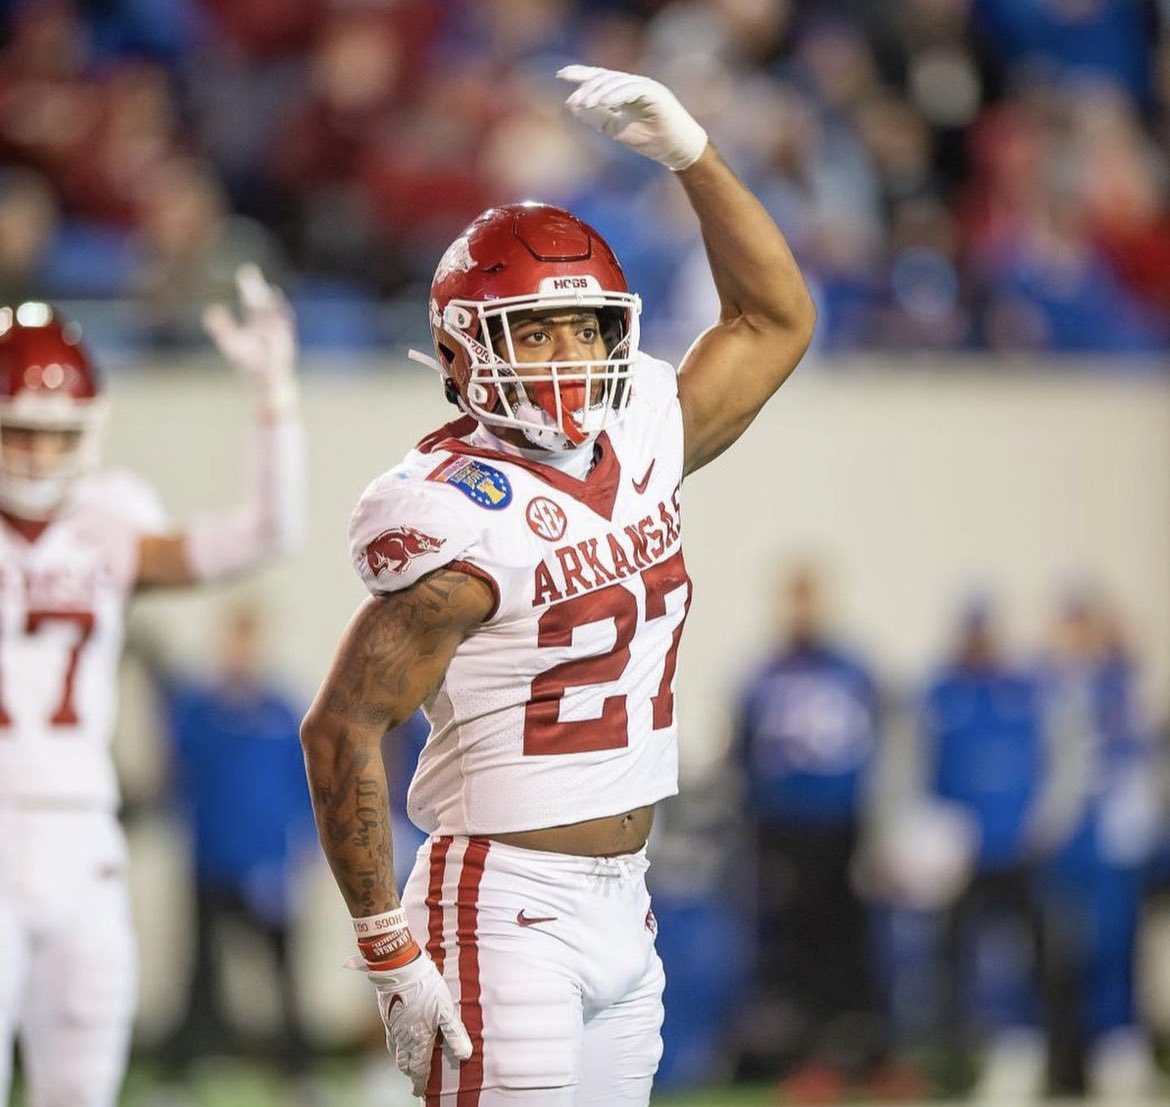 RT @will_whitson2: What Arkansas Football player will make a big leap in production from last year to this year? https://t.co/vtDRHxRDQW